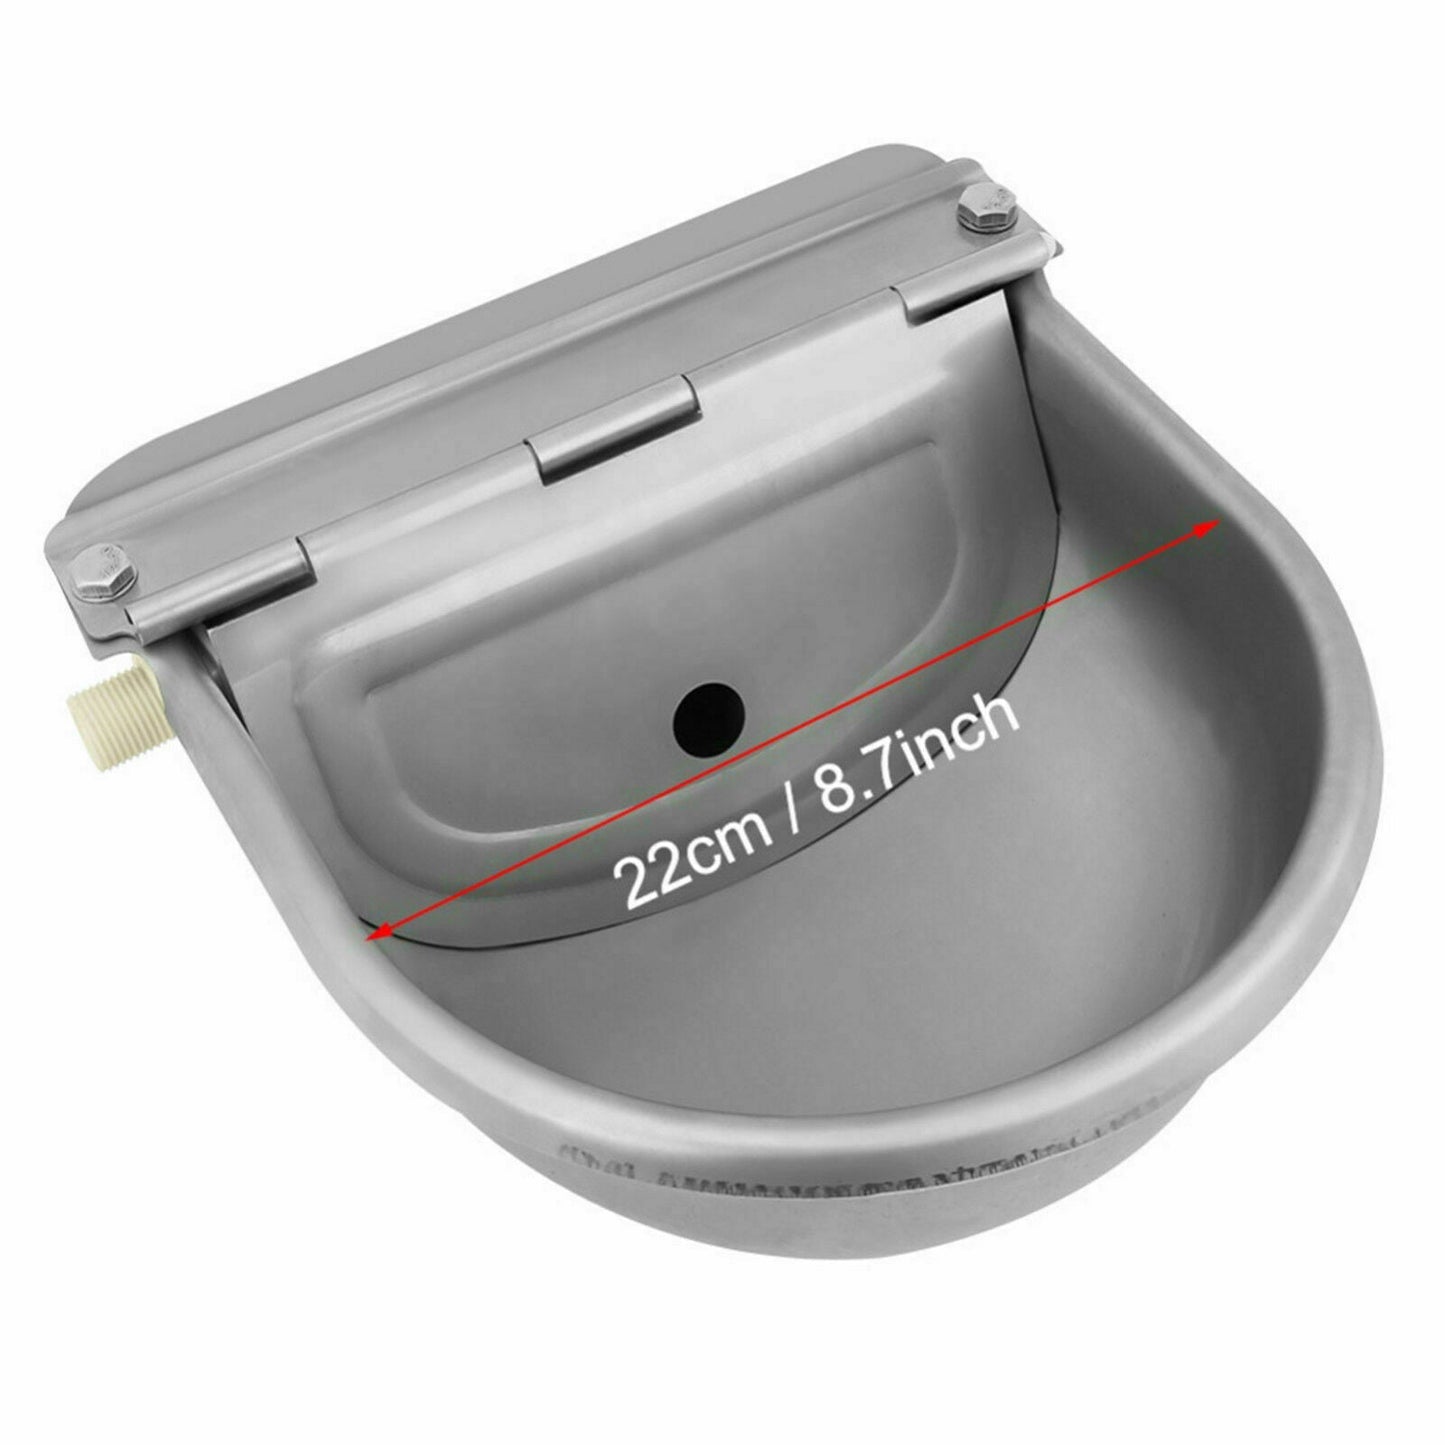 Stainless Water Trough Bowl Automatic Drinking For Dog Horse Chicken Auto Fill